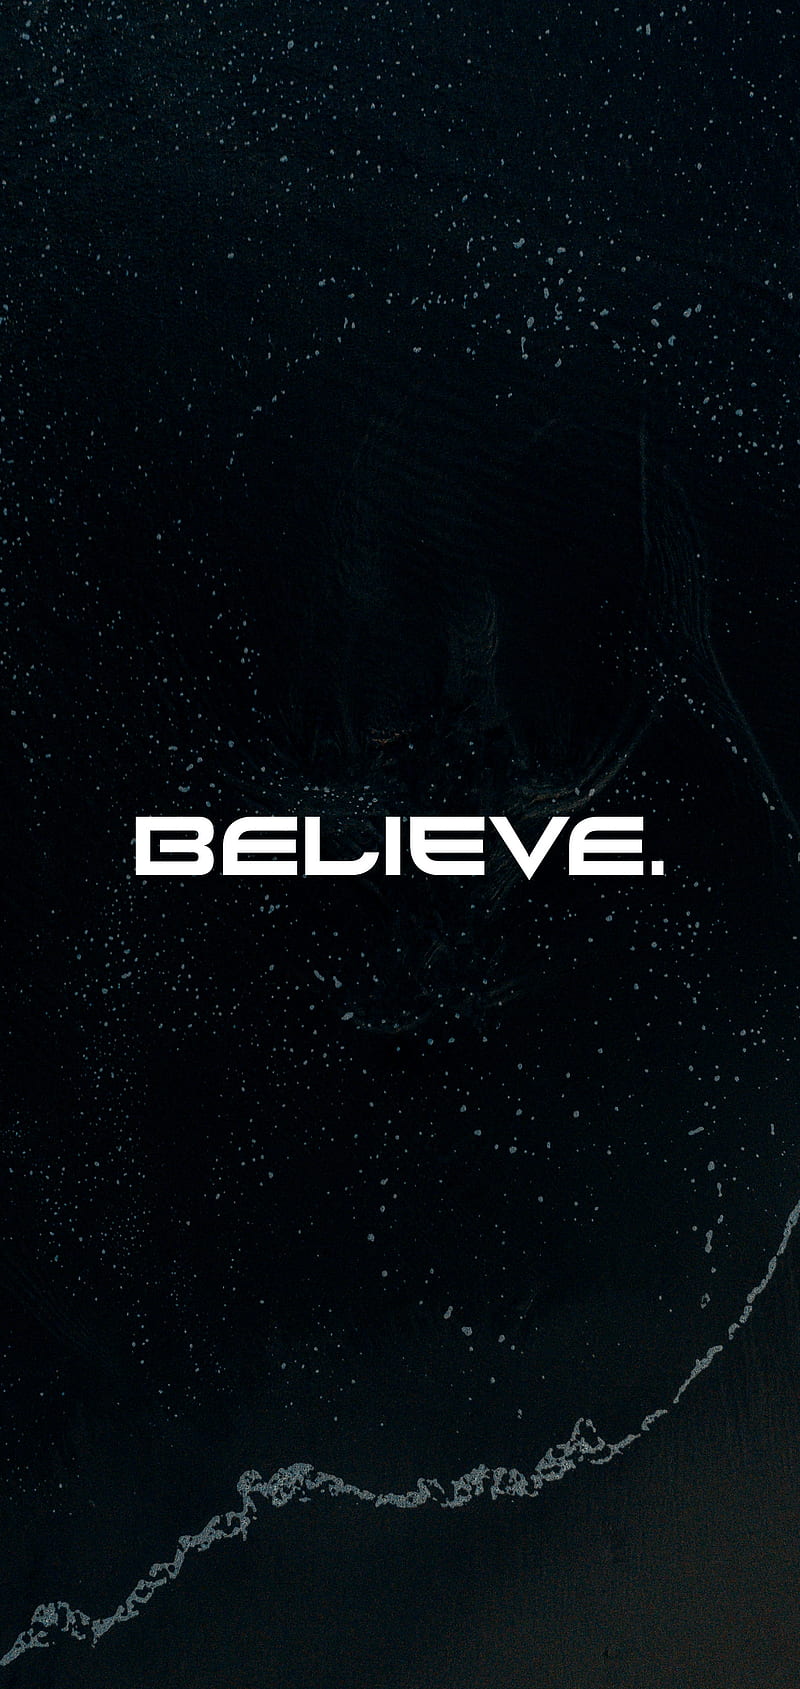 Ted Lasso - Believe Wall Poster, 22.375